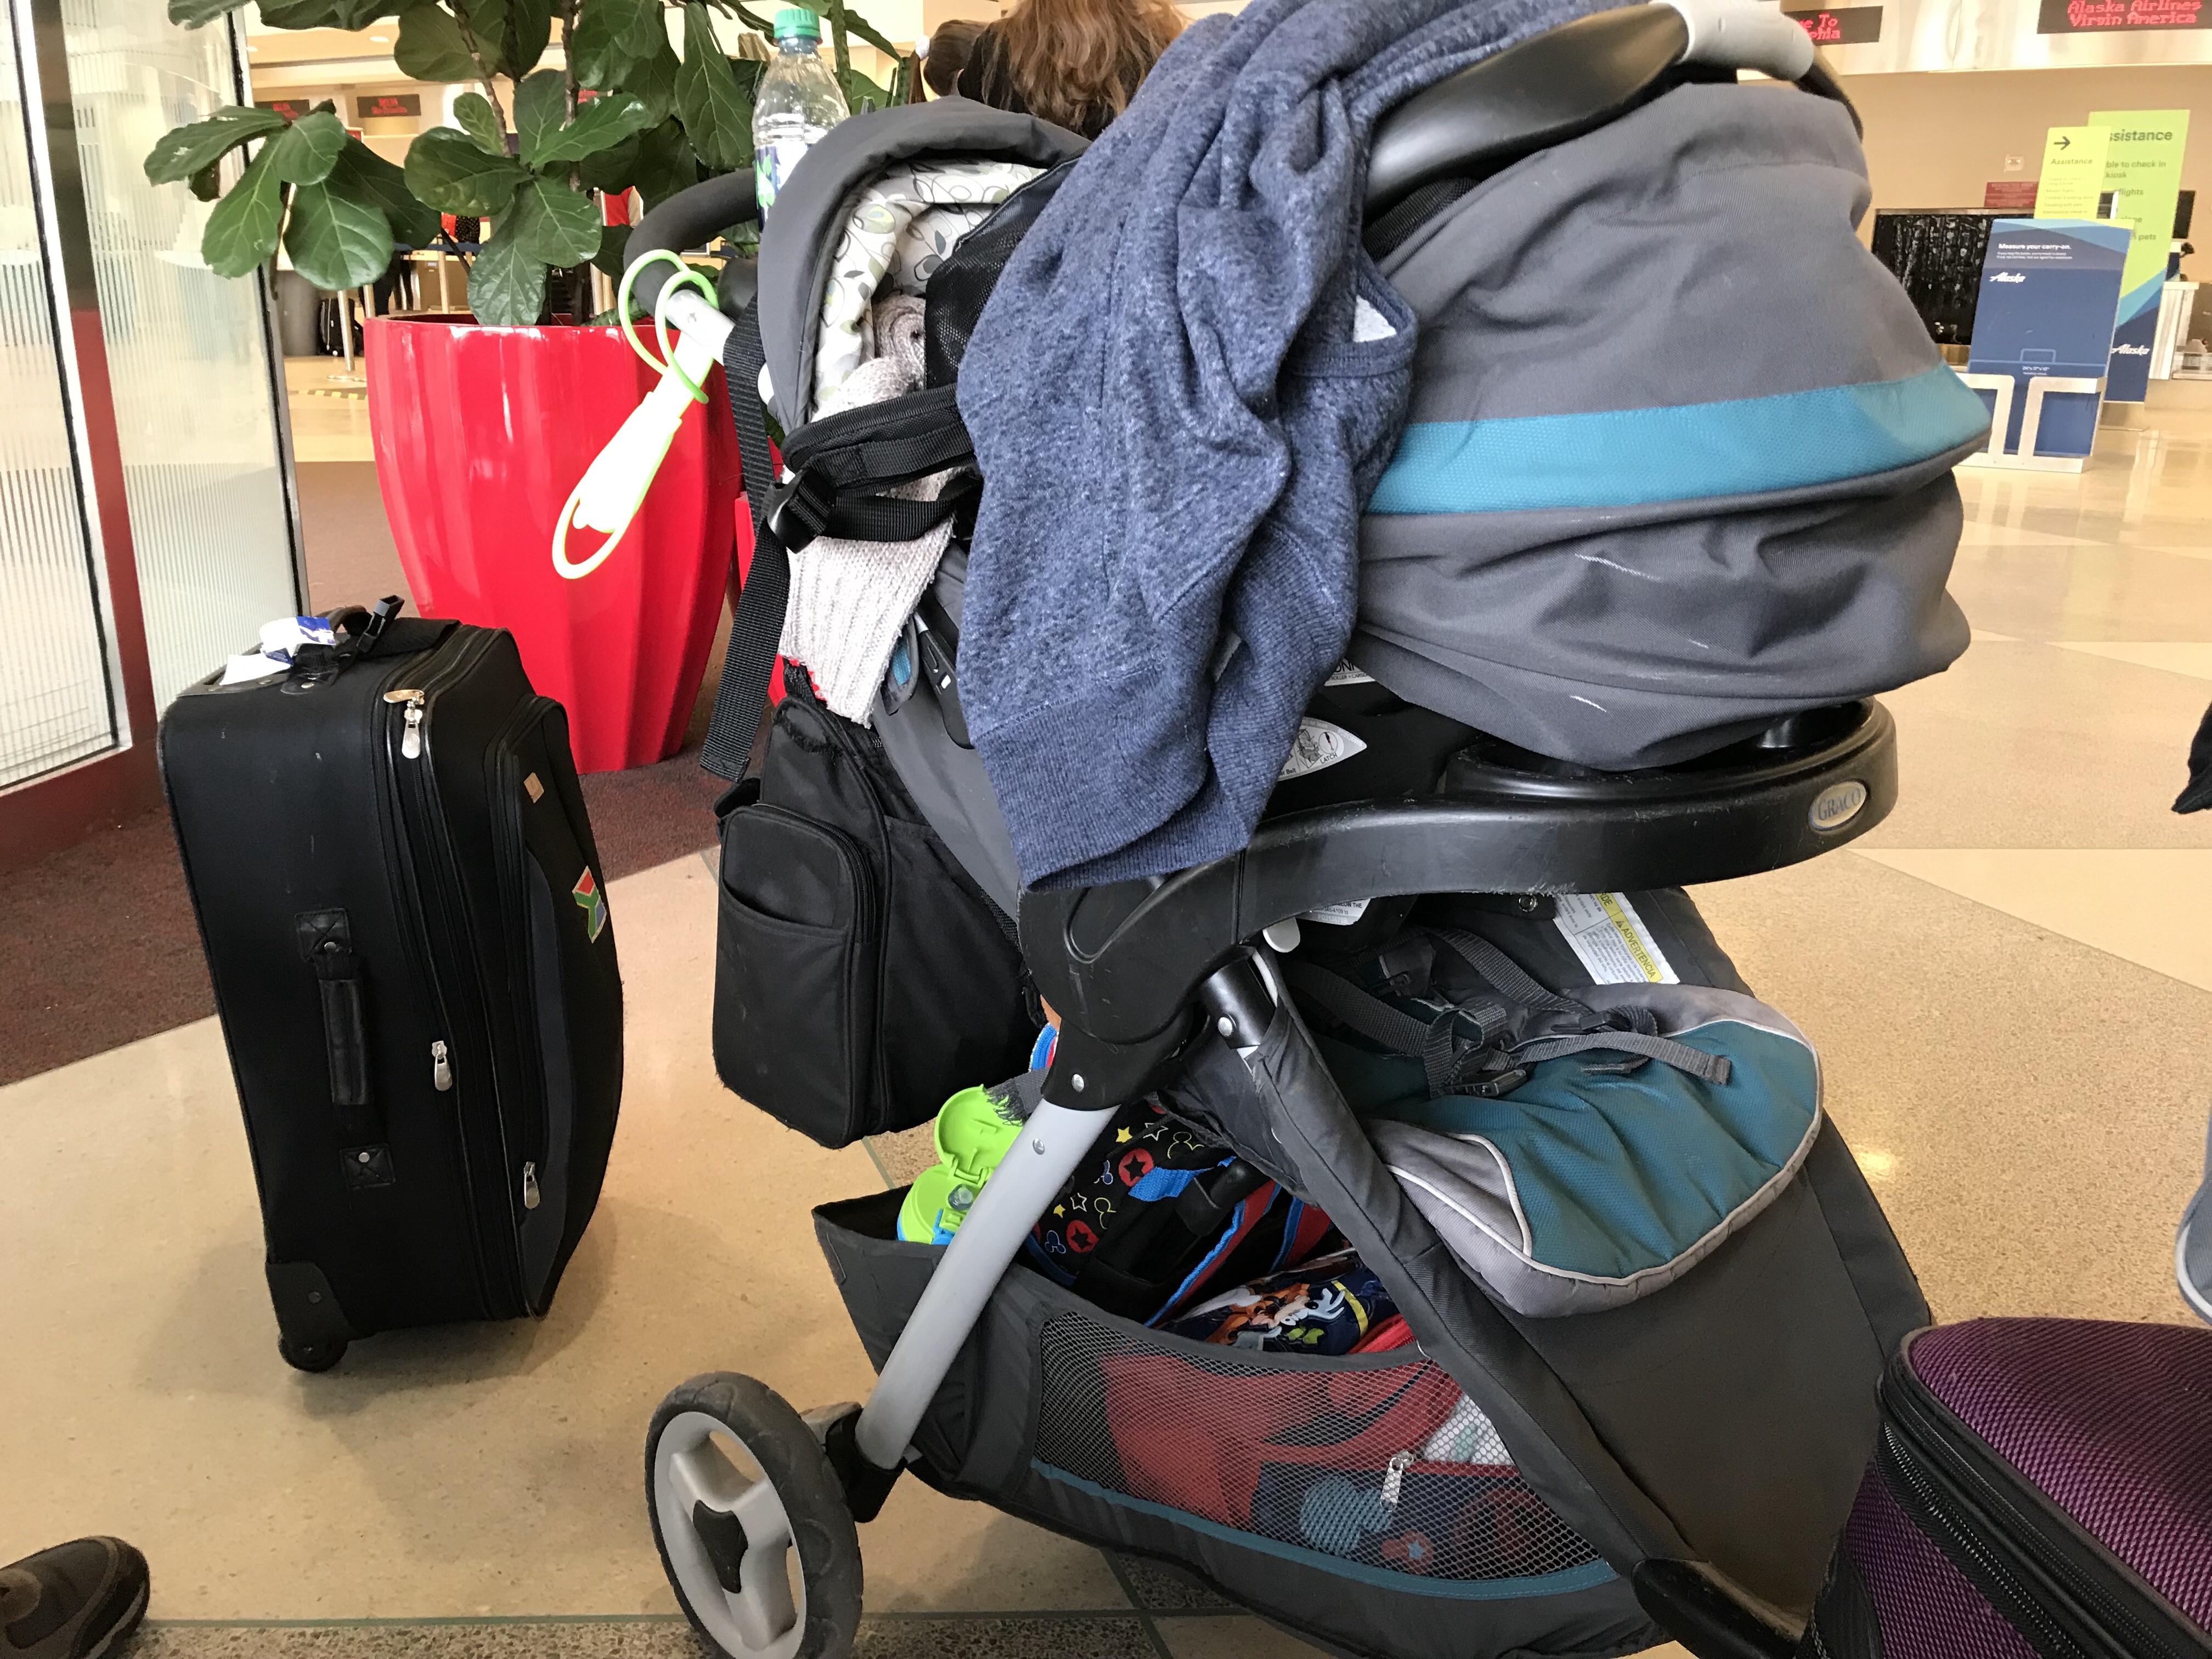 American Airlines stroller policy